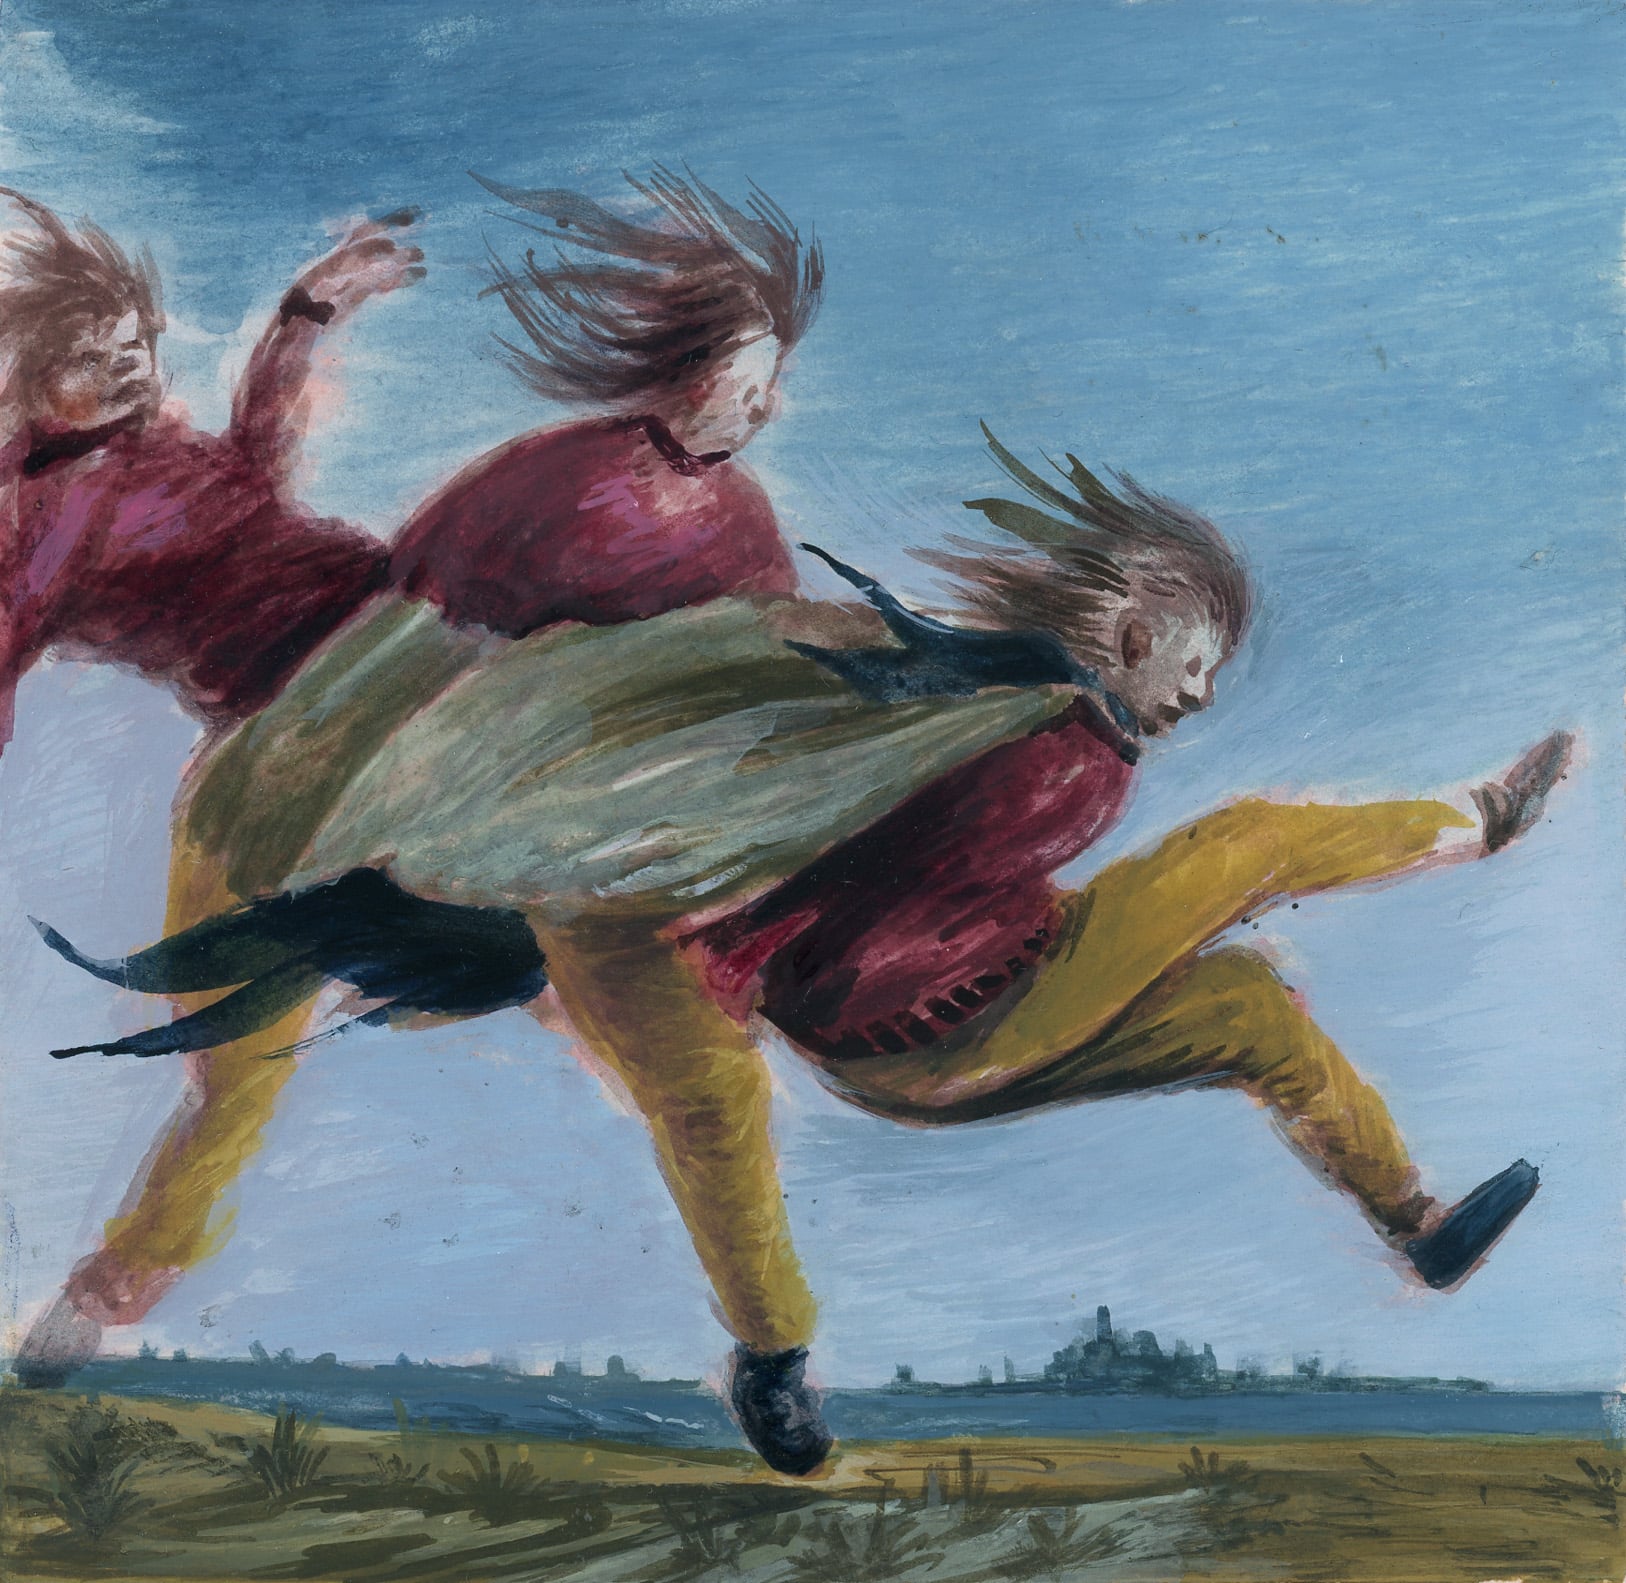 painting depicting a person in motion possibly falling